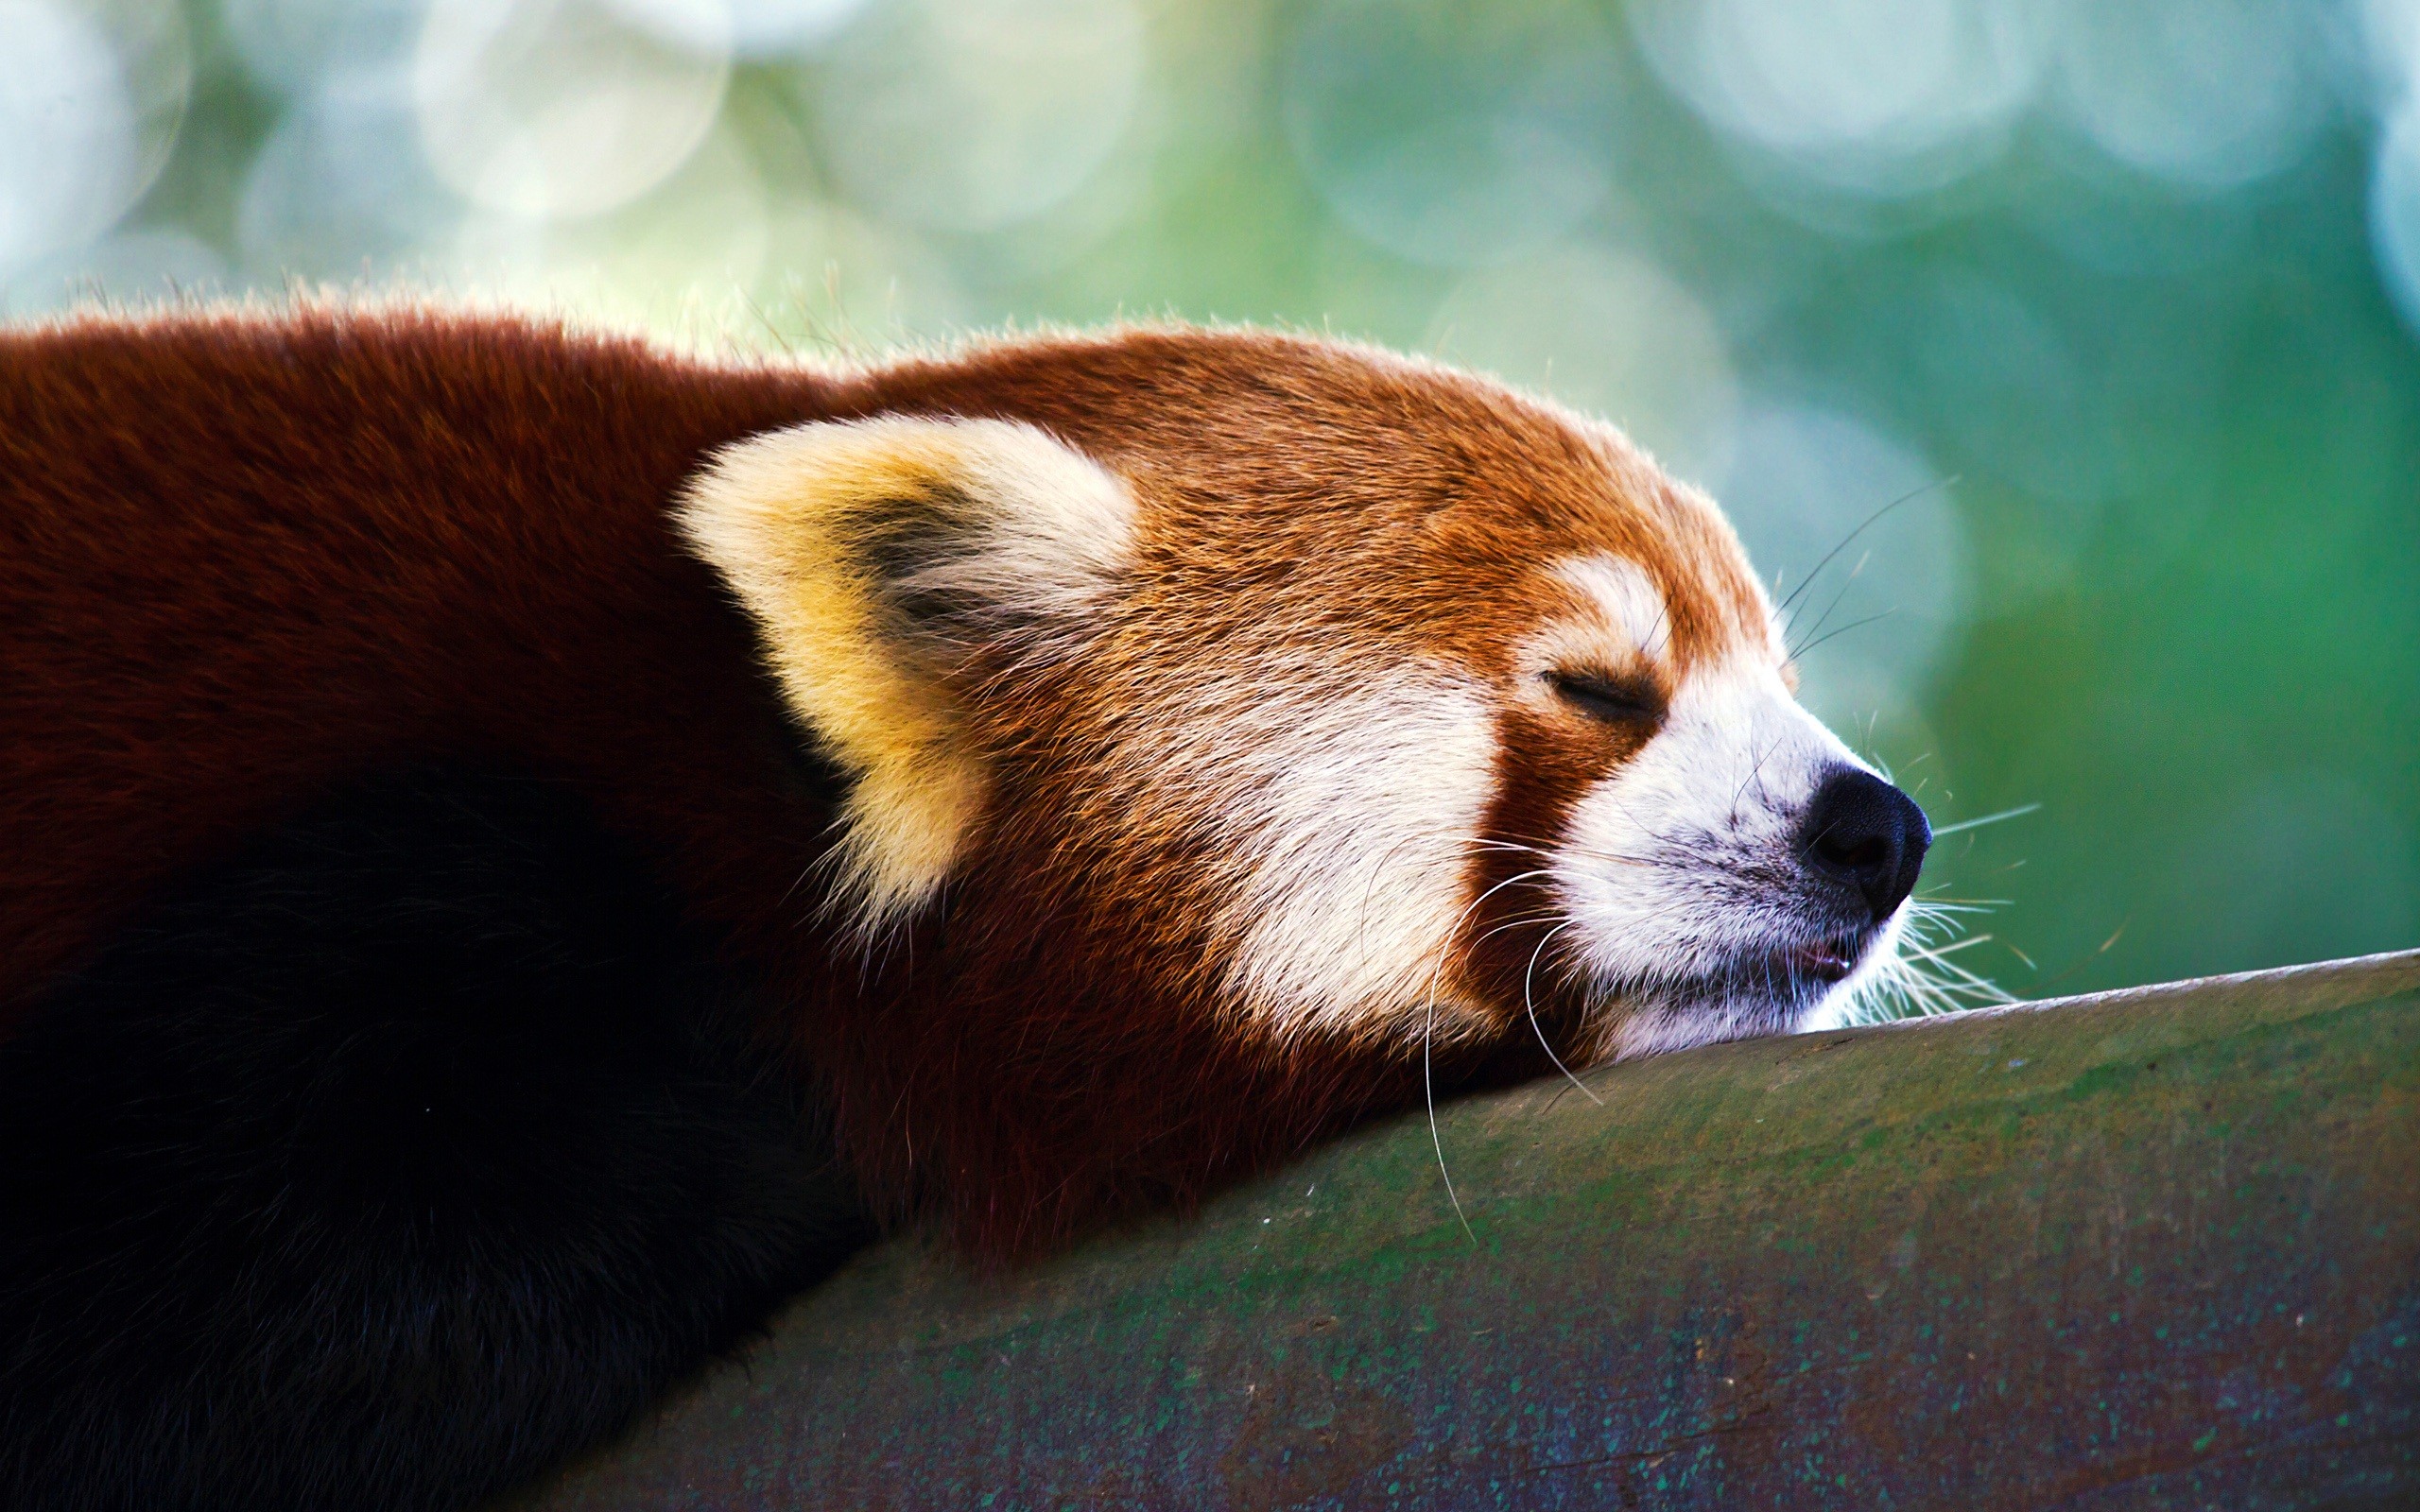 General 2560x1600 animals red panda red mammals relaxing